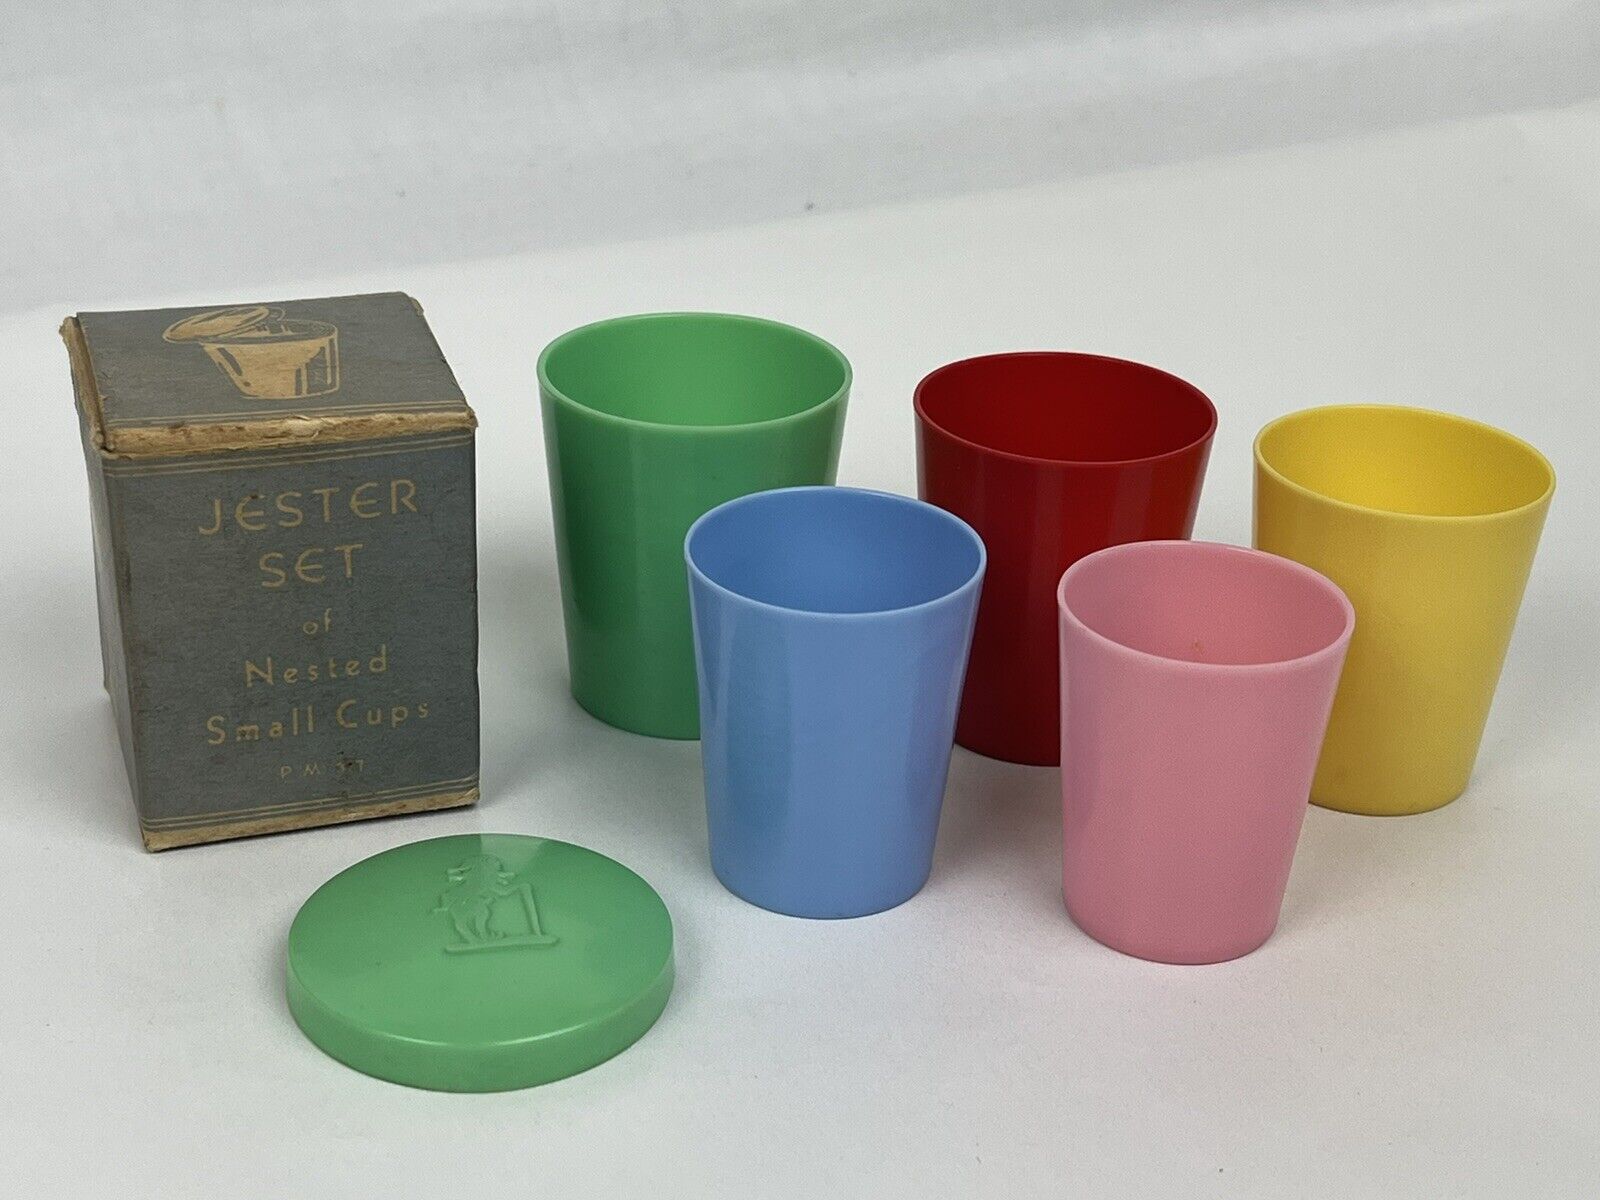 VINTAGE Colorful Nesting Medicine Cups Jester Set of Nestled Small Cups -  Doll